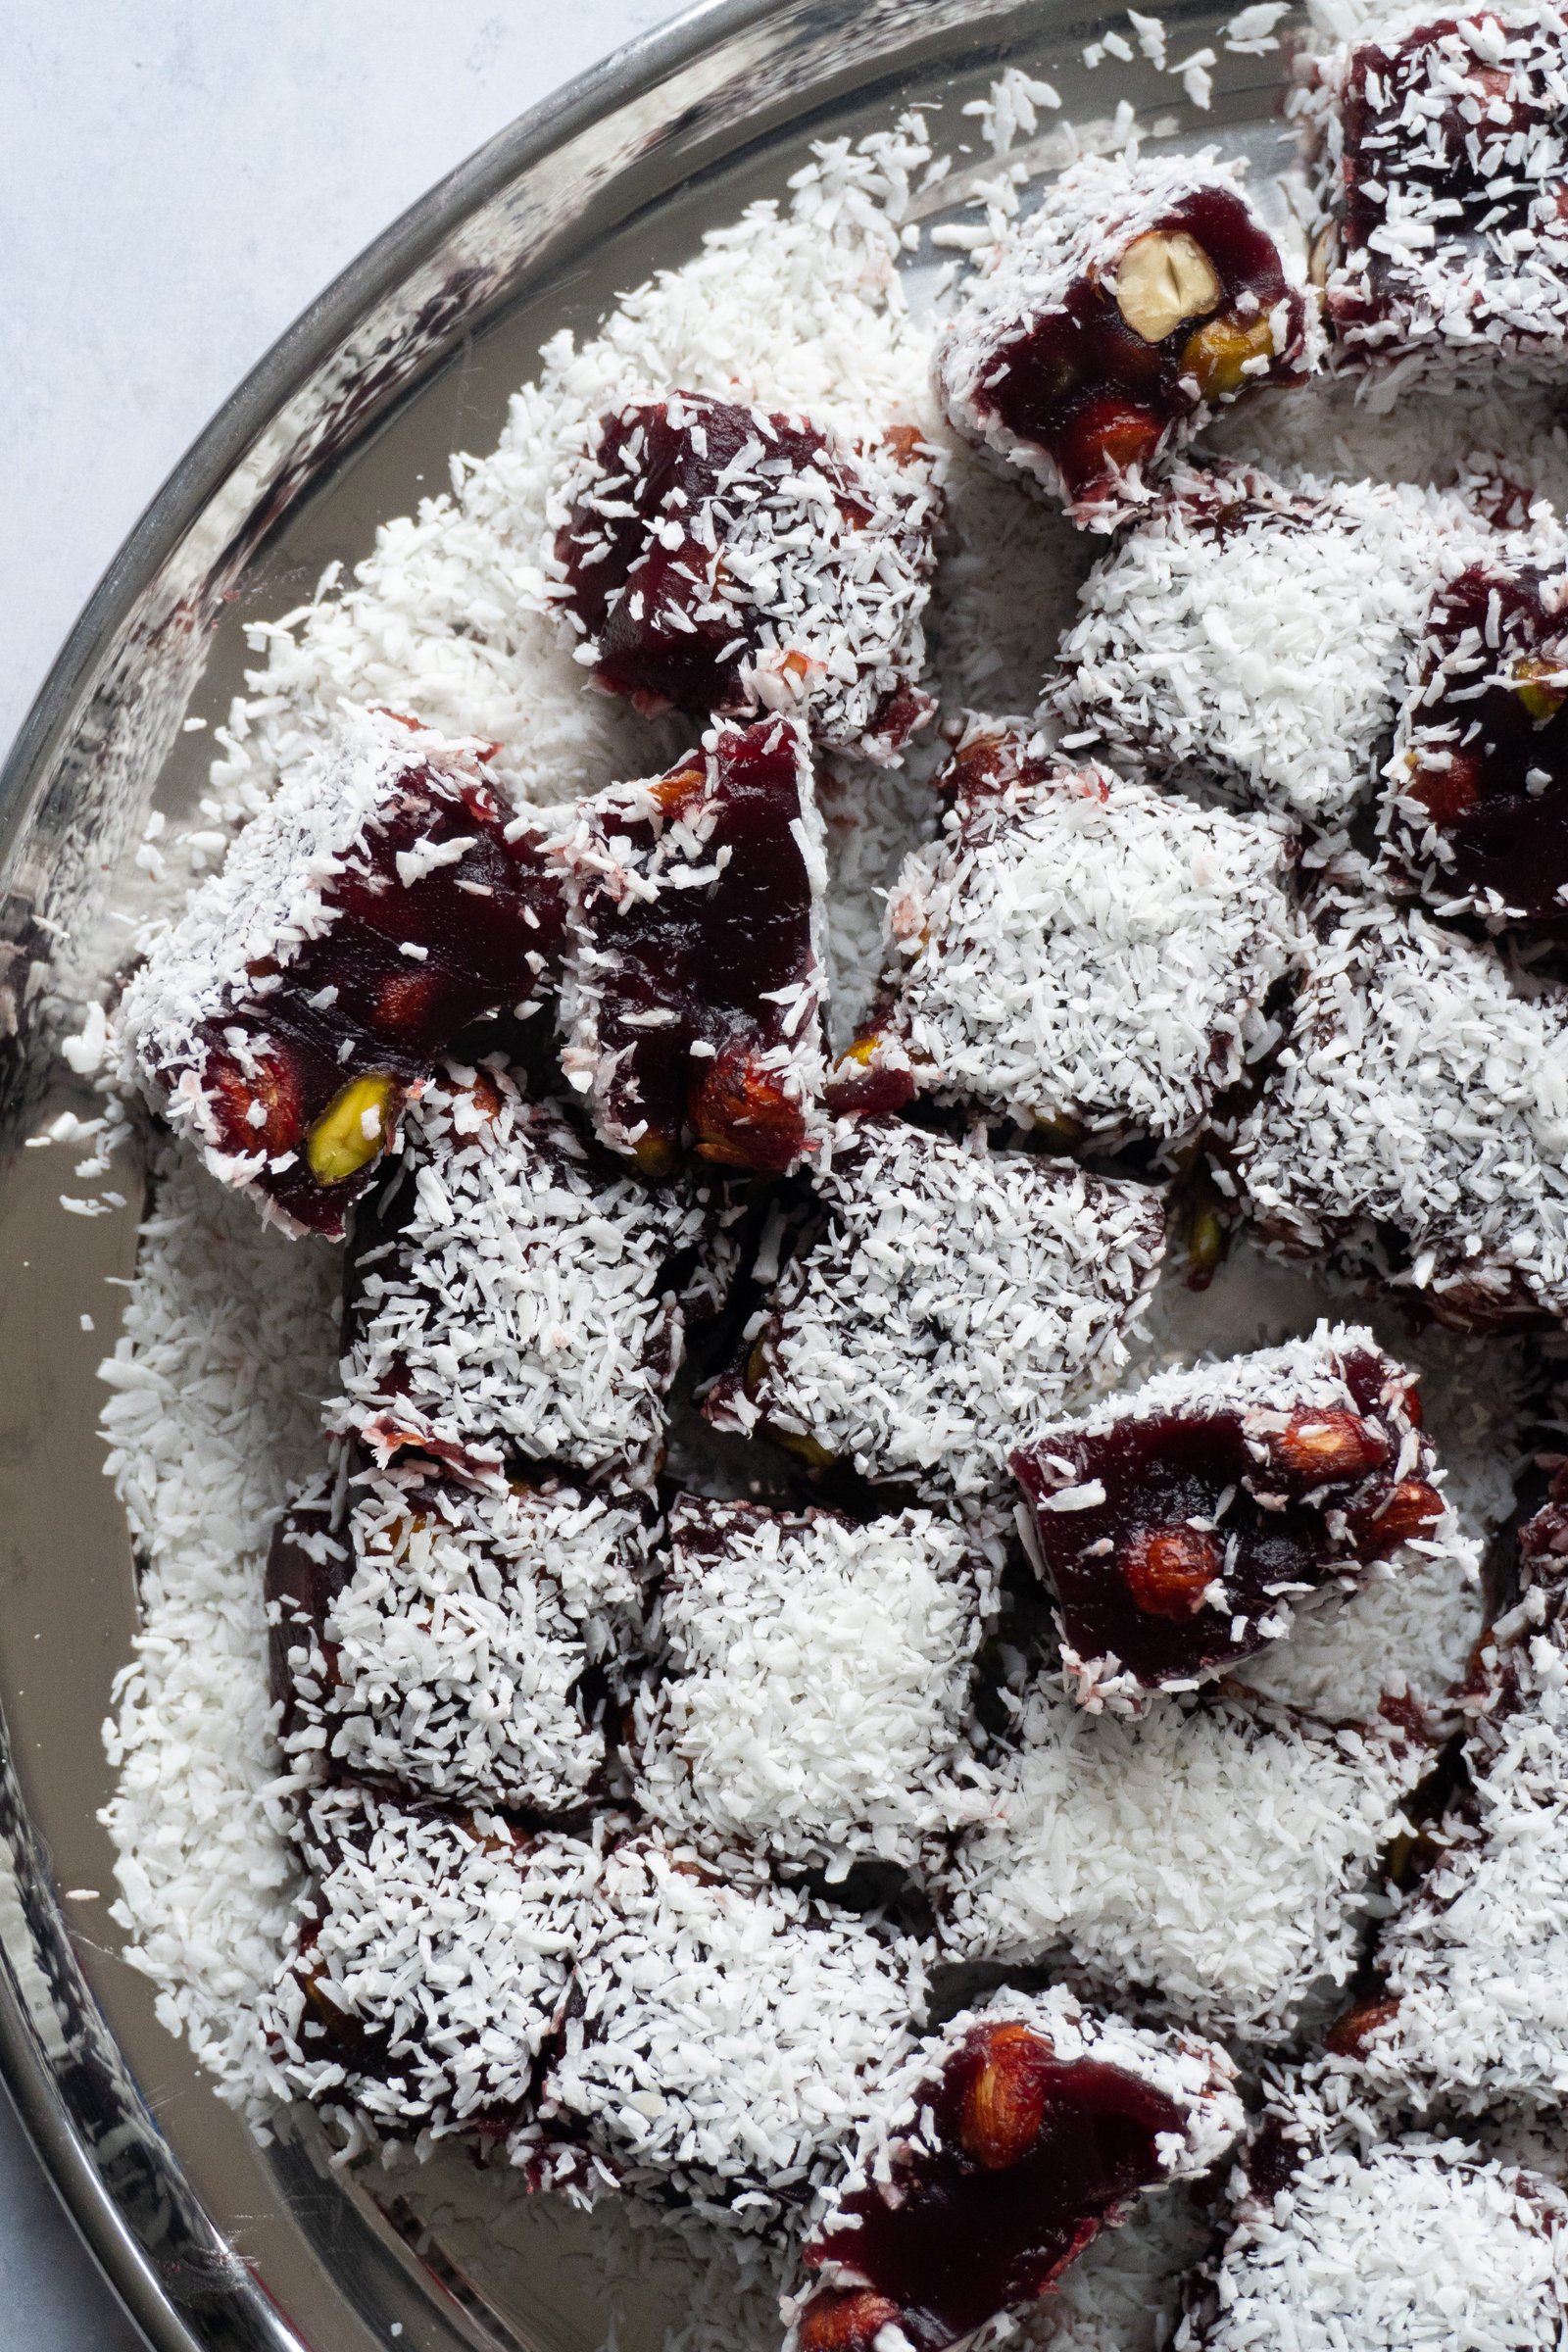 A top down view of a plate of pomegranate Turkish Delight, showcasing the intricate and decorative shapes.